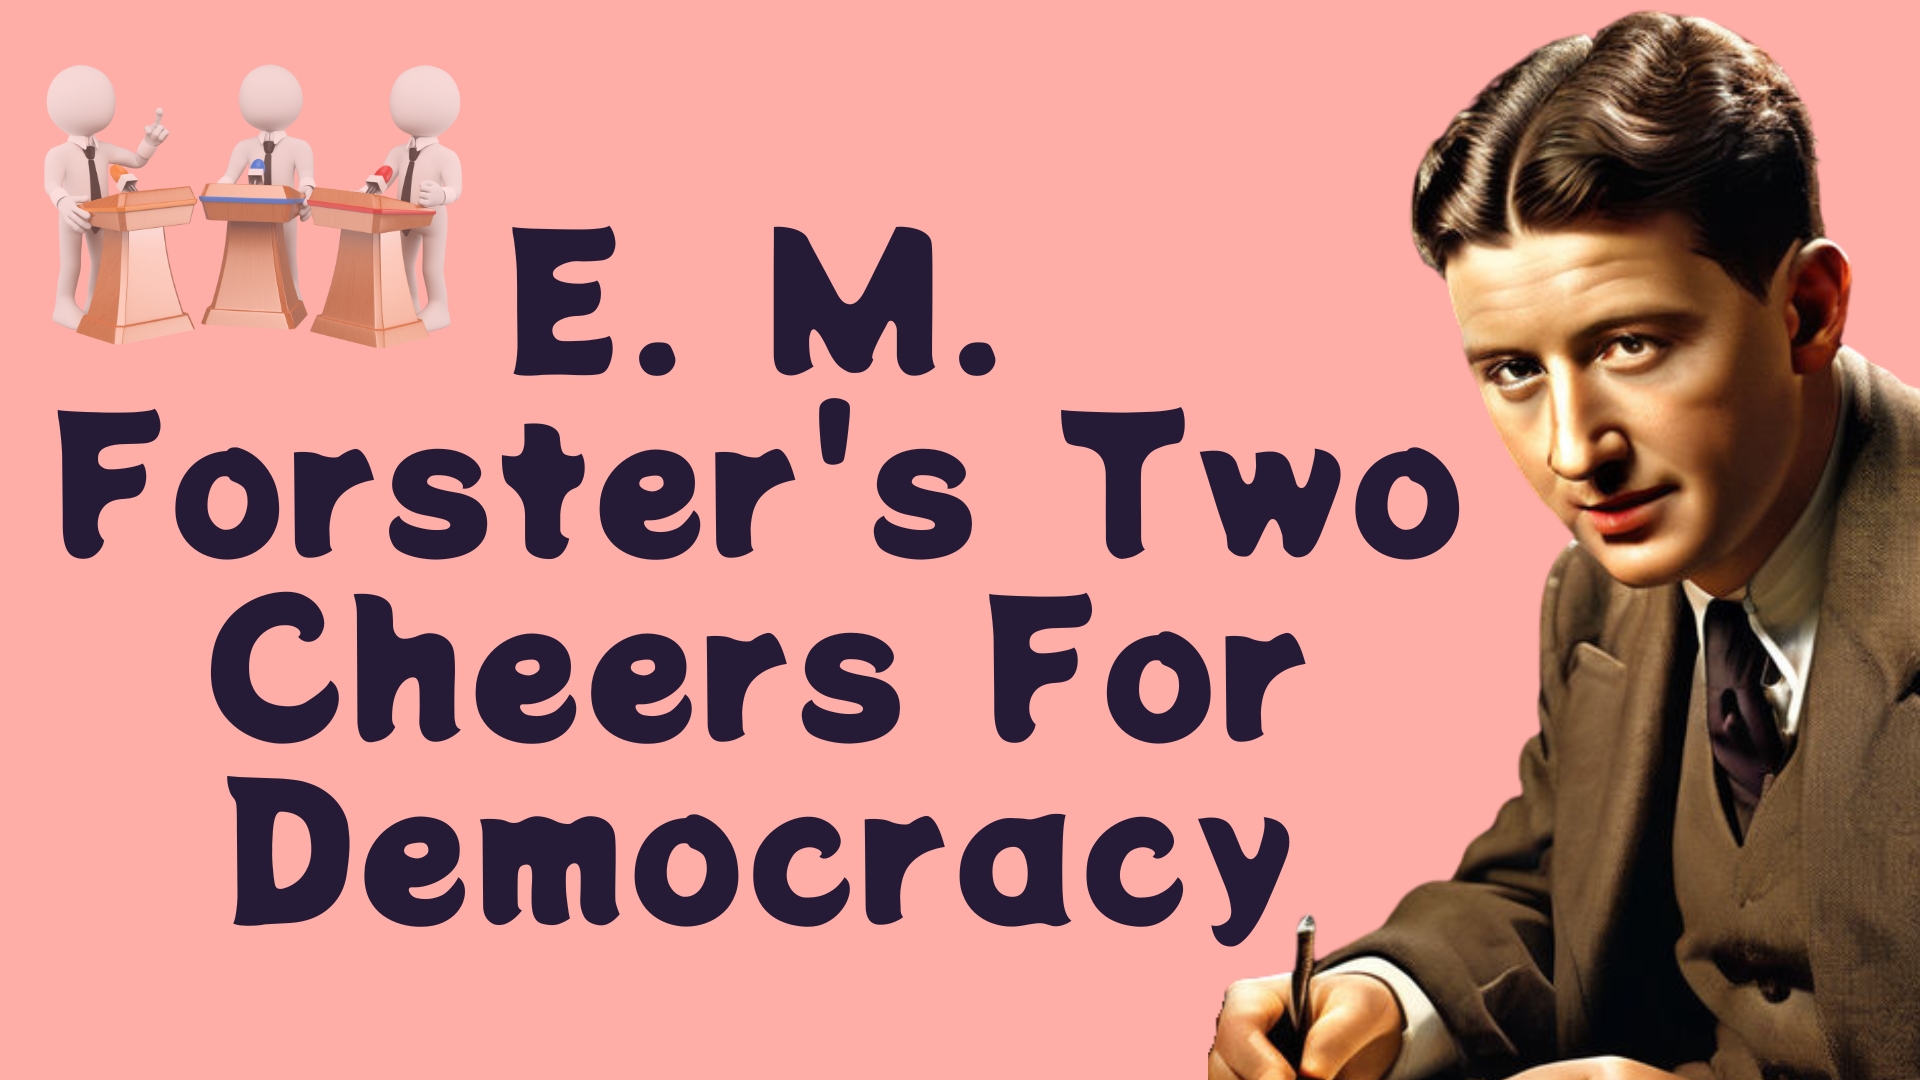 E. M. Forster's Two Cheers For Democracy